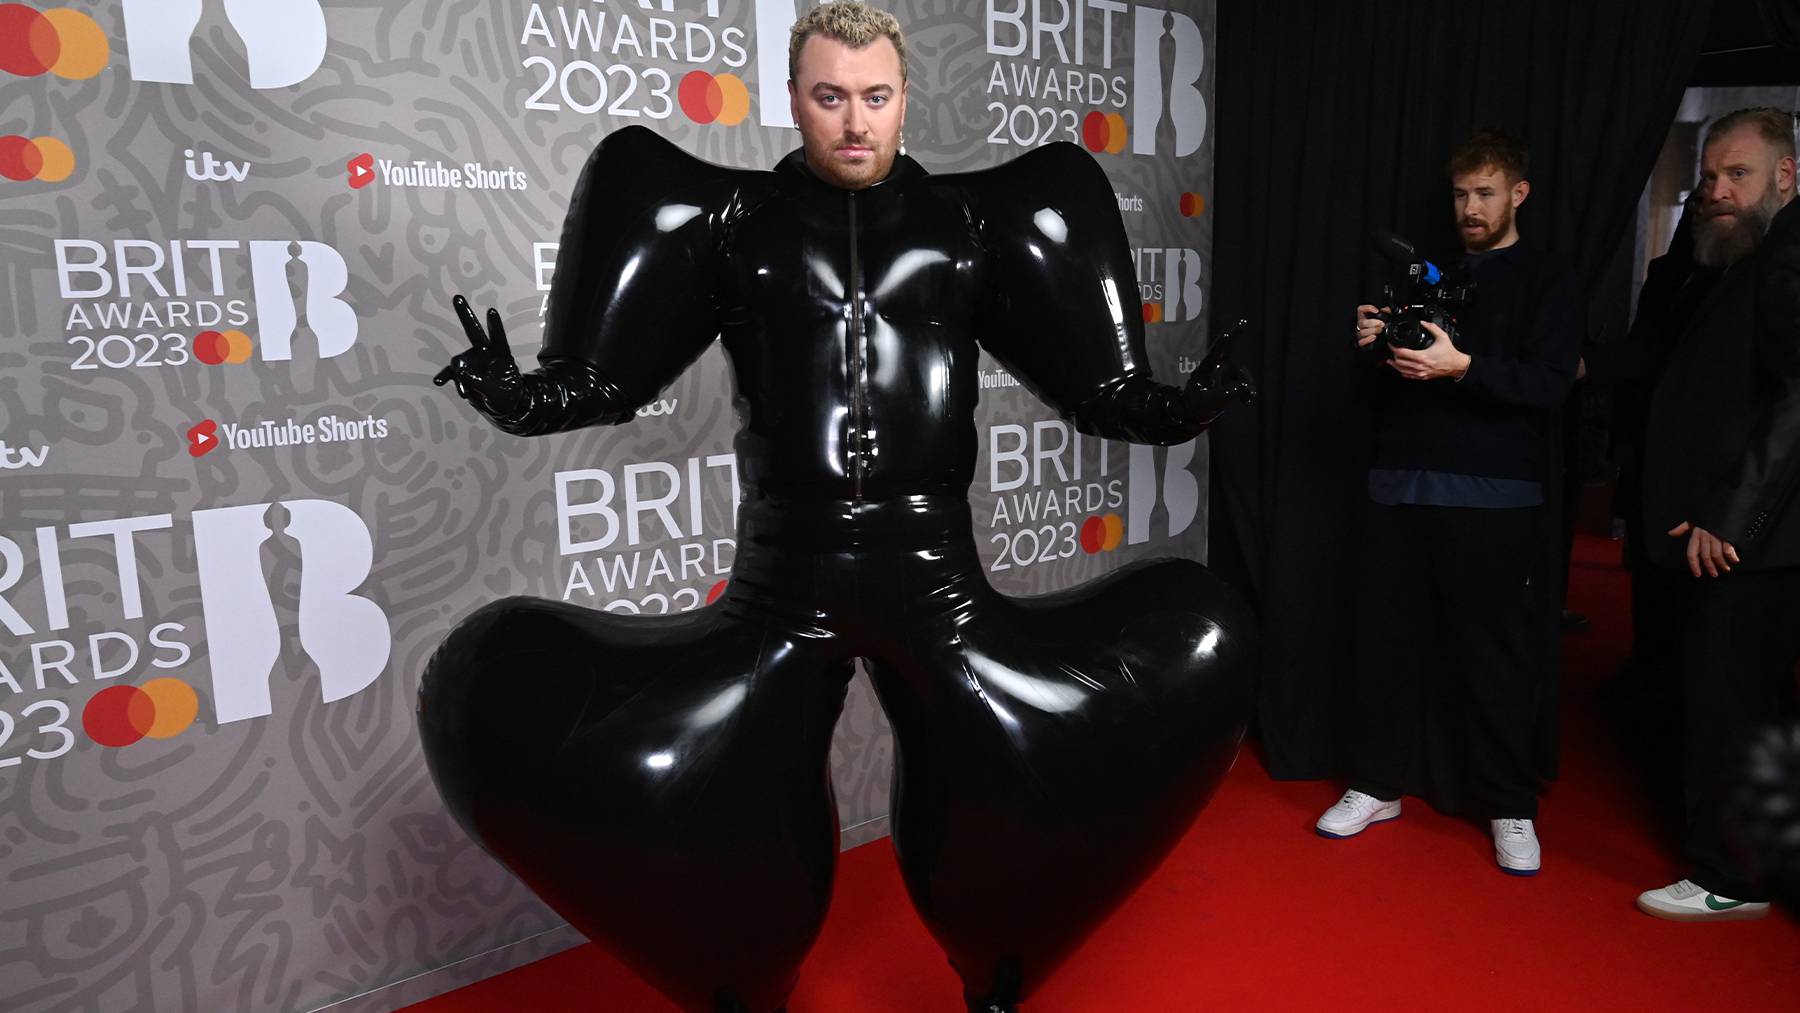 Sam Smith attends The BRIT Awards 2023.